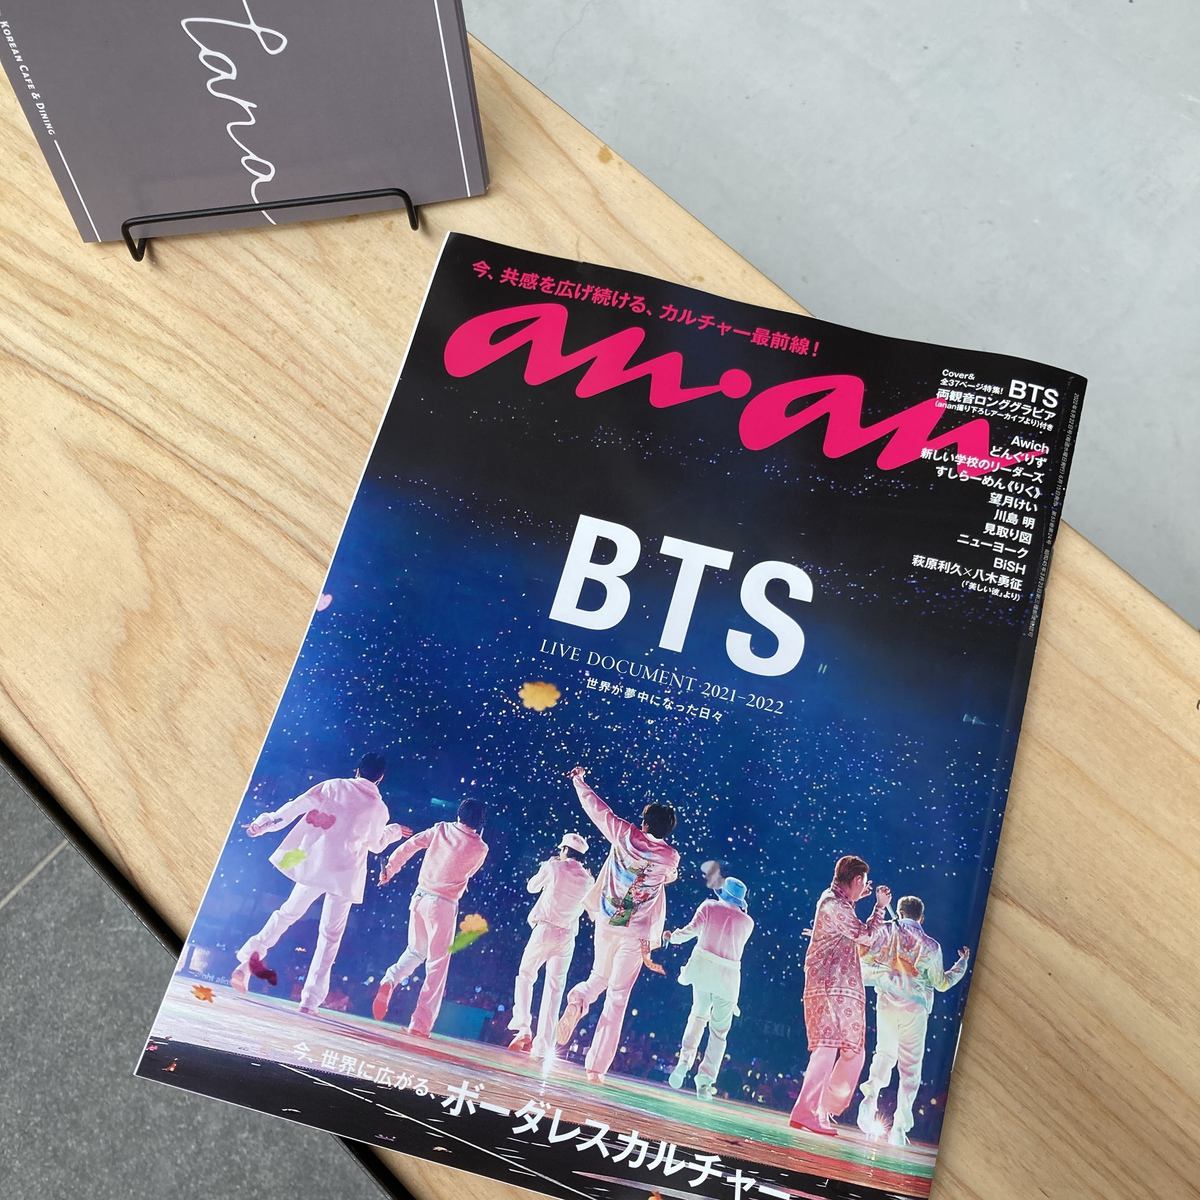 TANATANA was featured in an ･ an No.2303! The cover page is BTS ☆ A sample is placed at the store, so please pick it up when you come to the store ♪